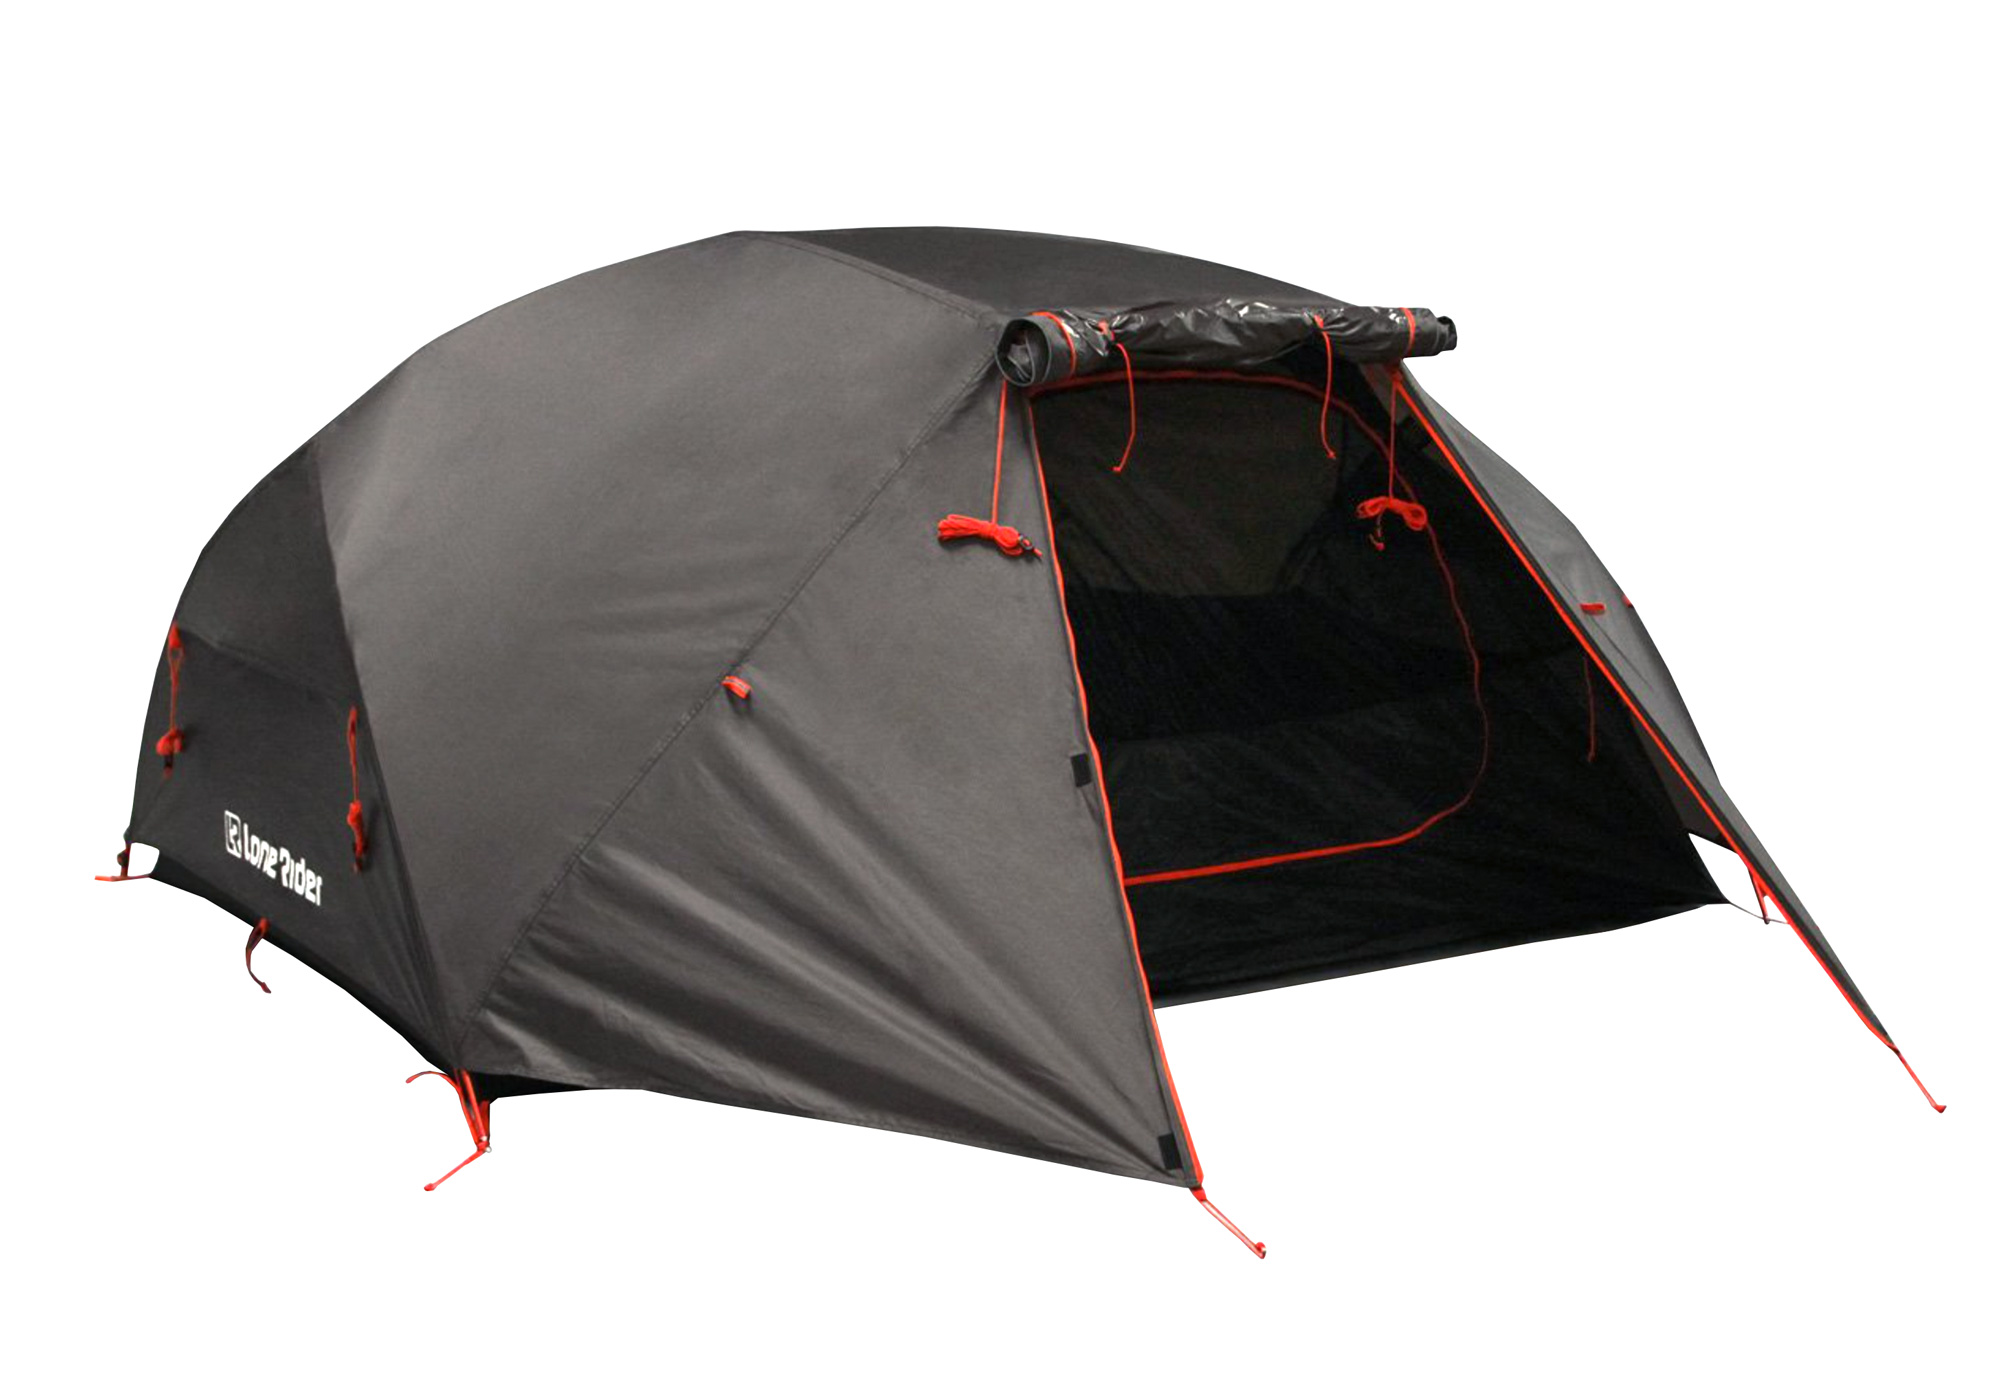 Tips&Tricks about ADV Tent